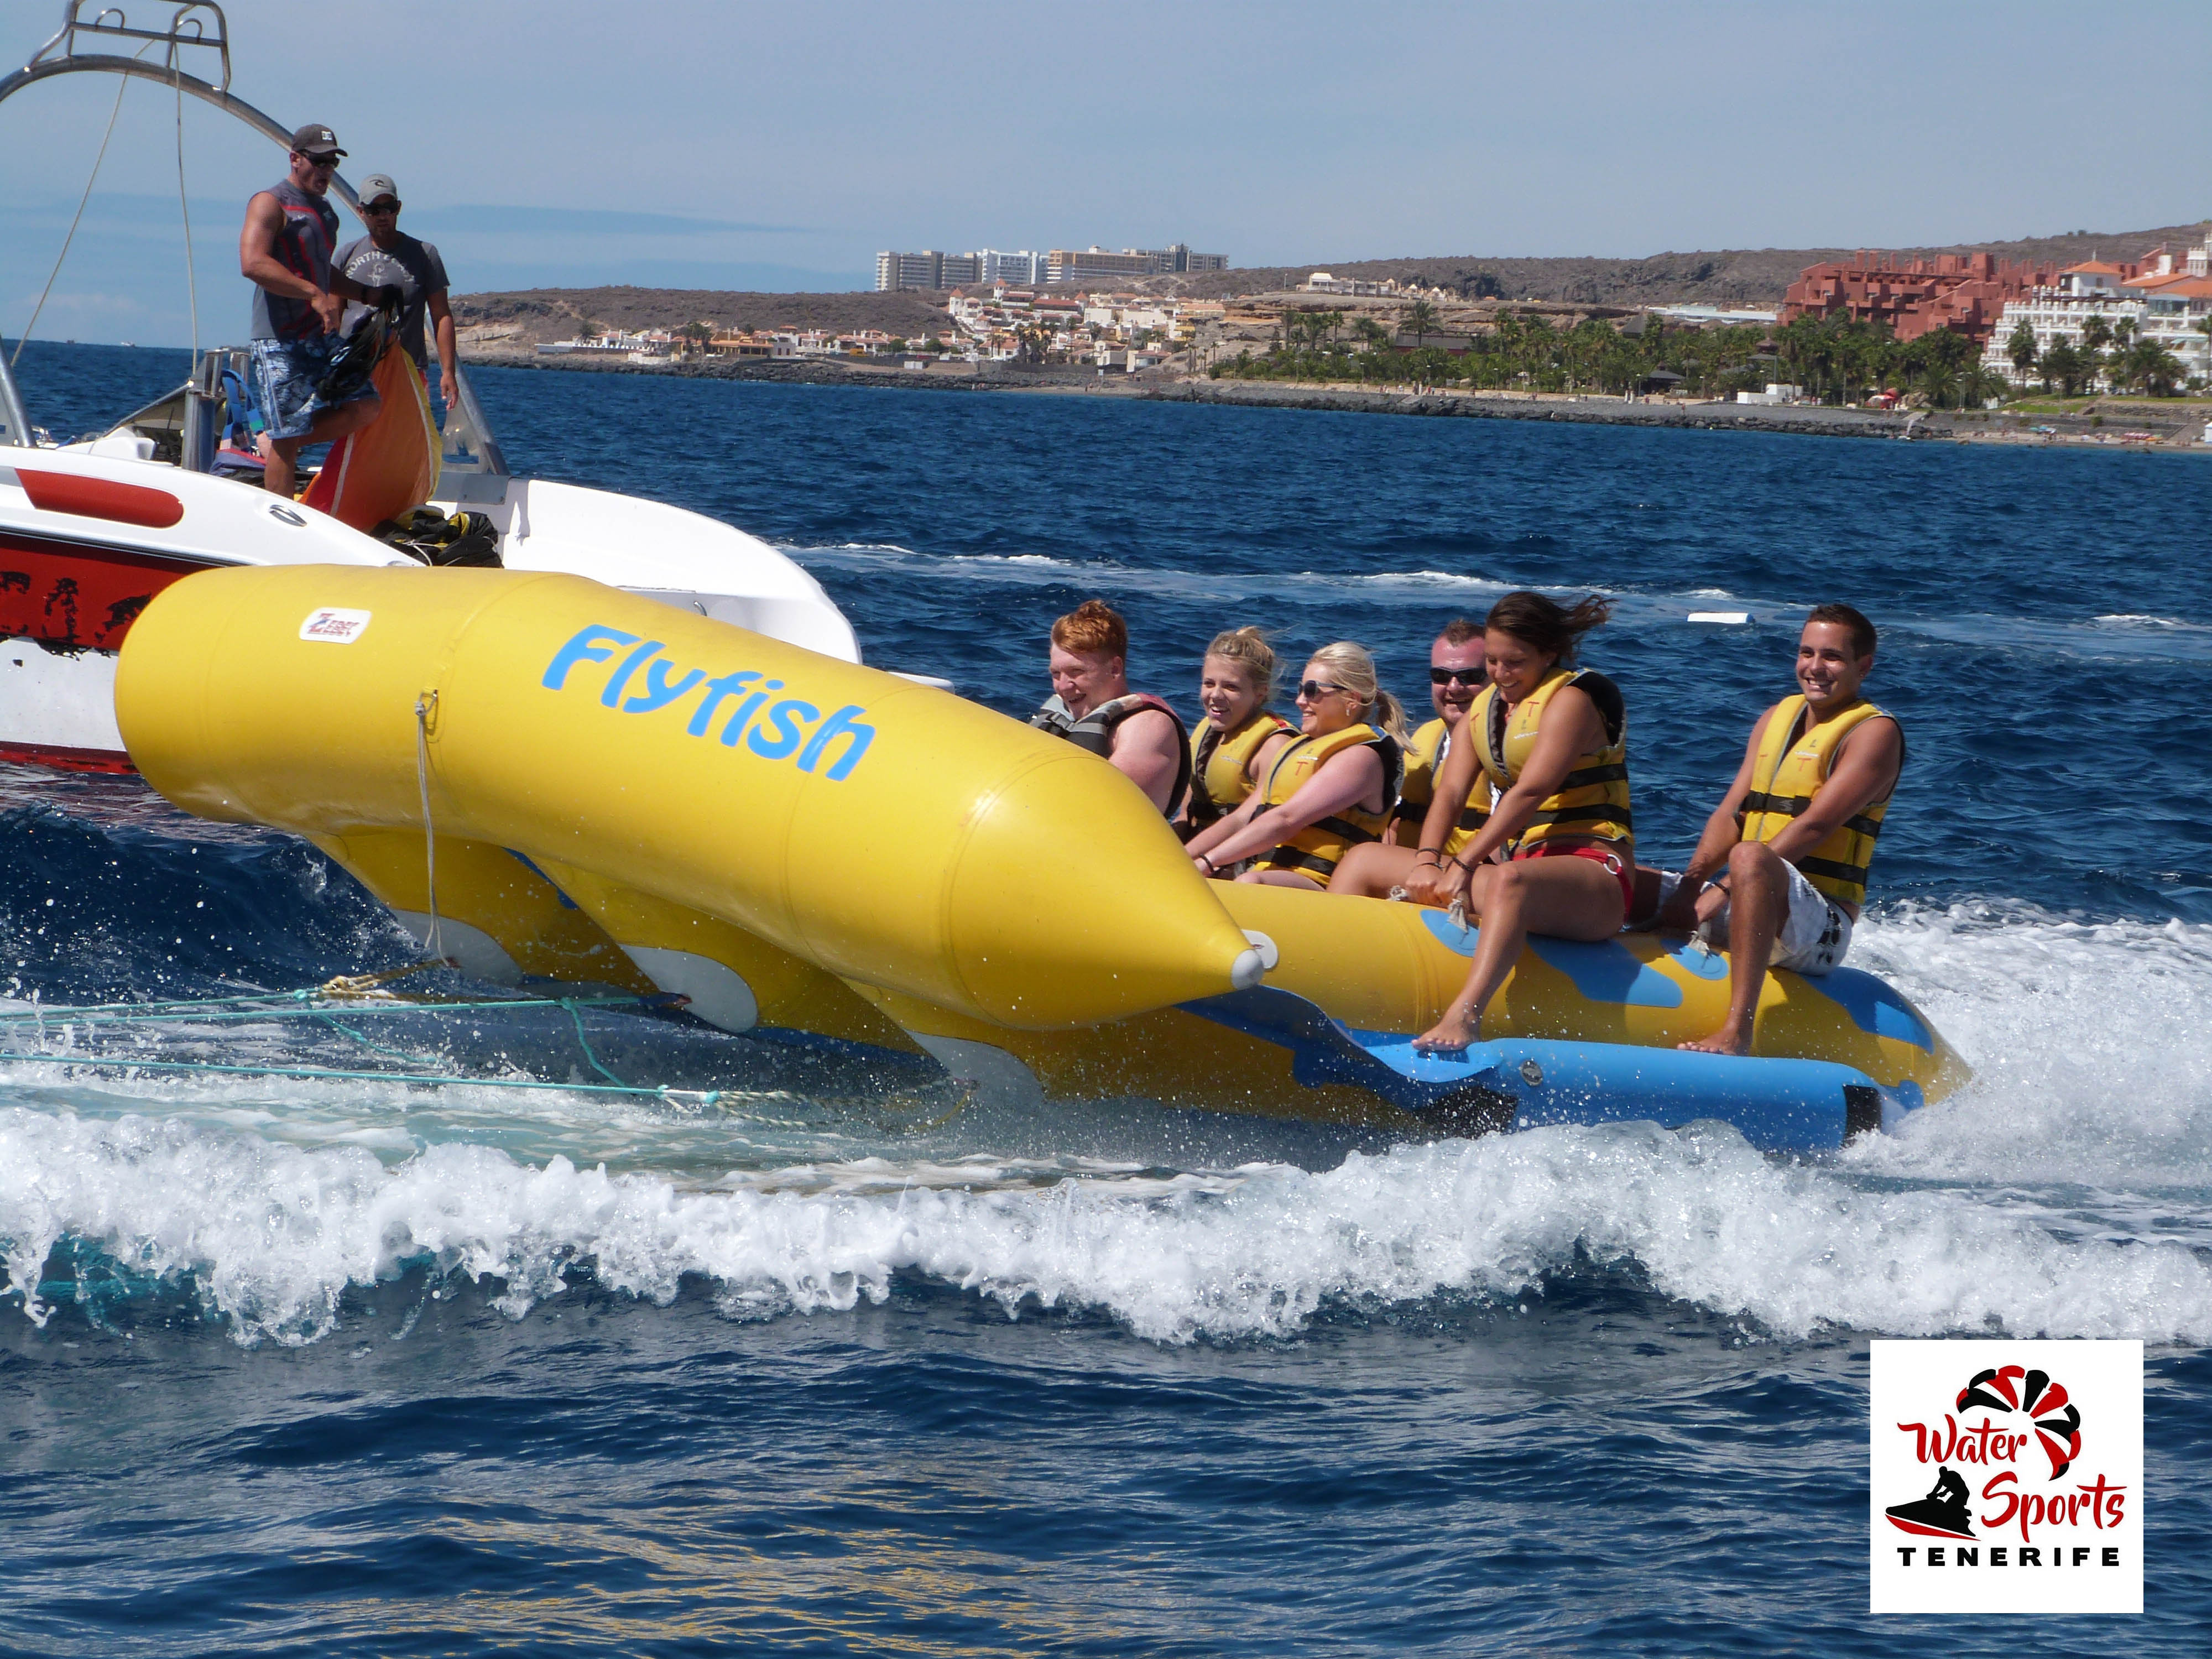 flyfish water sports and activities in costa adeje puerto colon